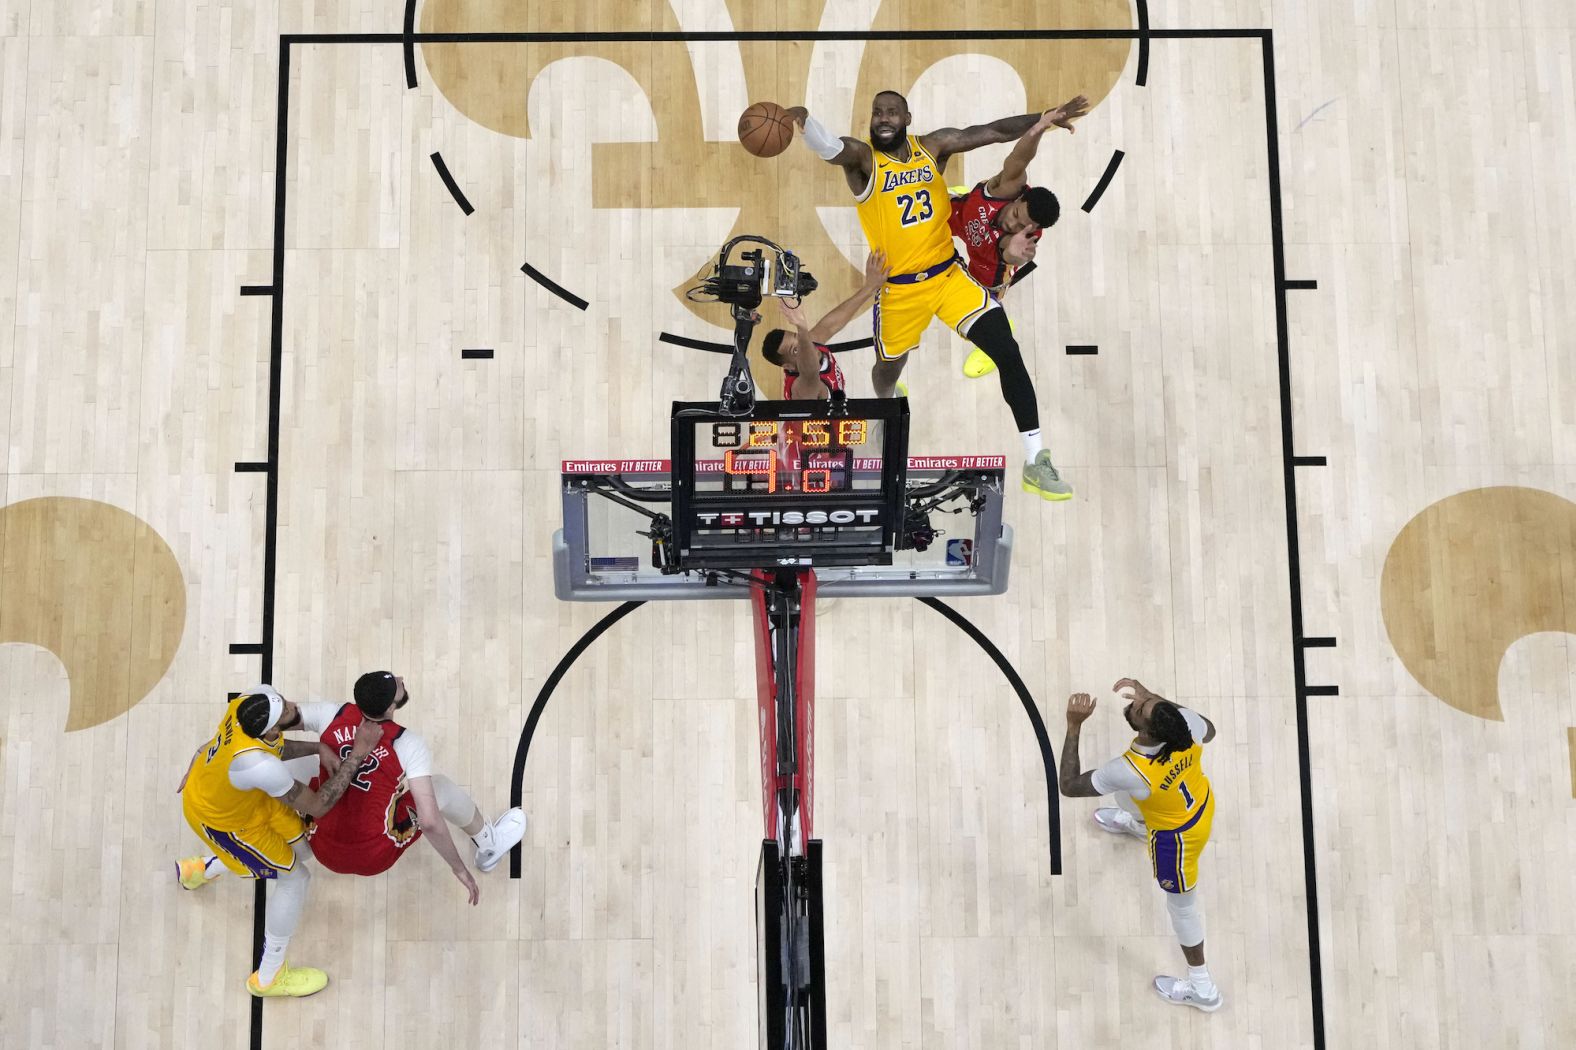 Los Angeles Lakers forward LeBron James shoots during a game agains the New Orleans Pelicans in New Orleans on Tuesday, April 16.